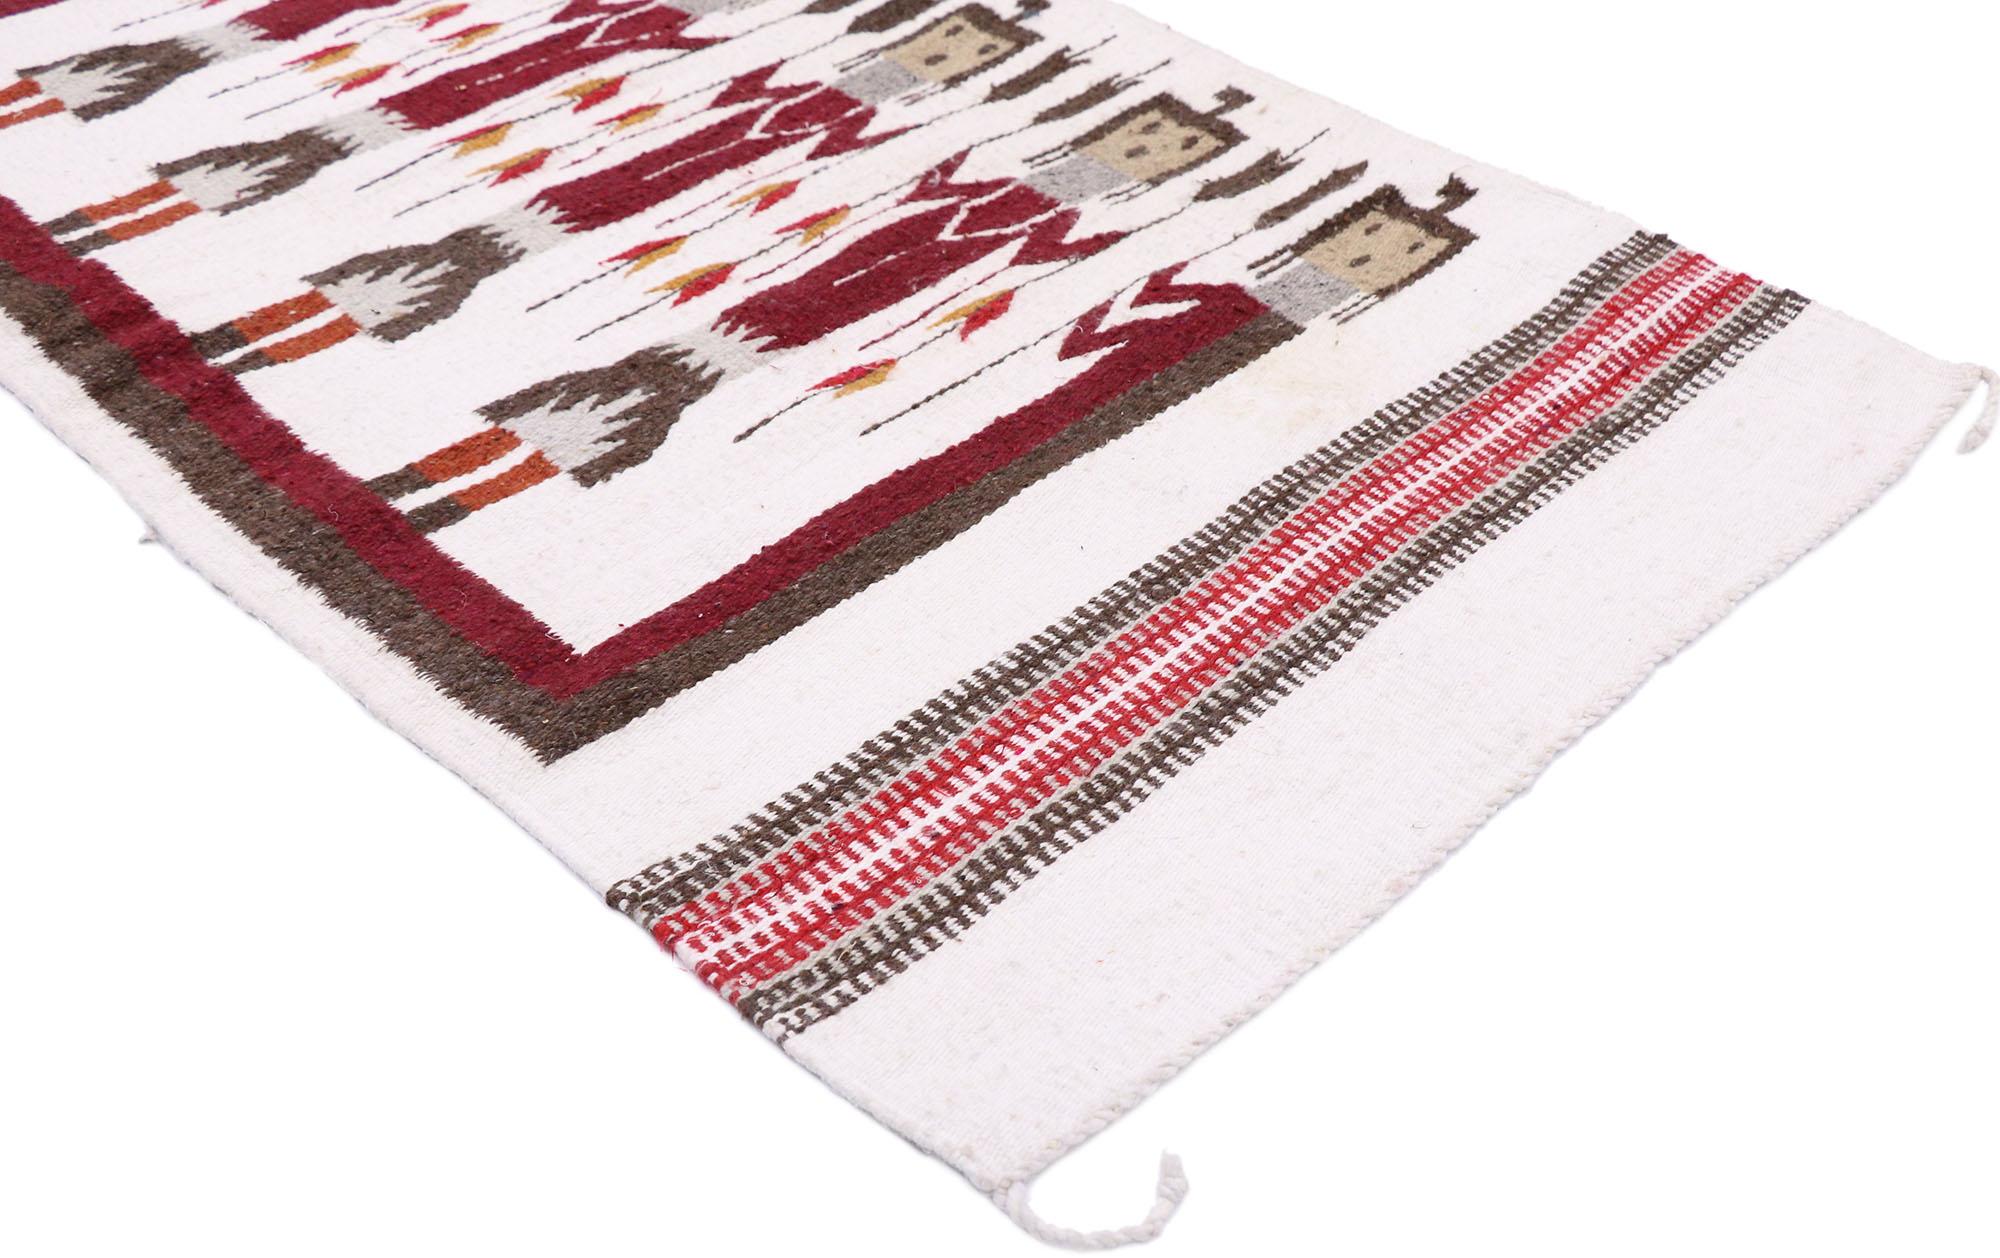 77771 Vintage Navajo Yeibichai Rug, 02'07 x 05'03. Yeibichai Navajo rugs are a distinctive type of Navajo weaving that depict figures from the Yeibichai dance, a ceremonial dance central to the Nightway ceremony in Navajo culture. These rugs feature